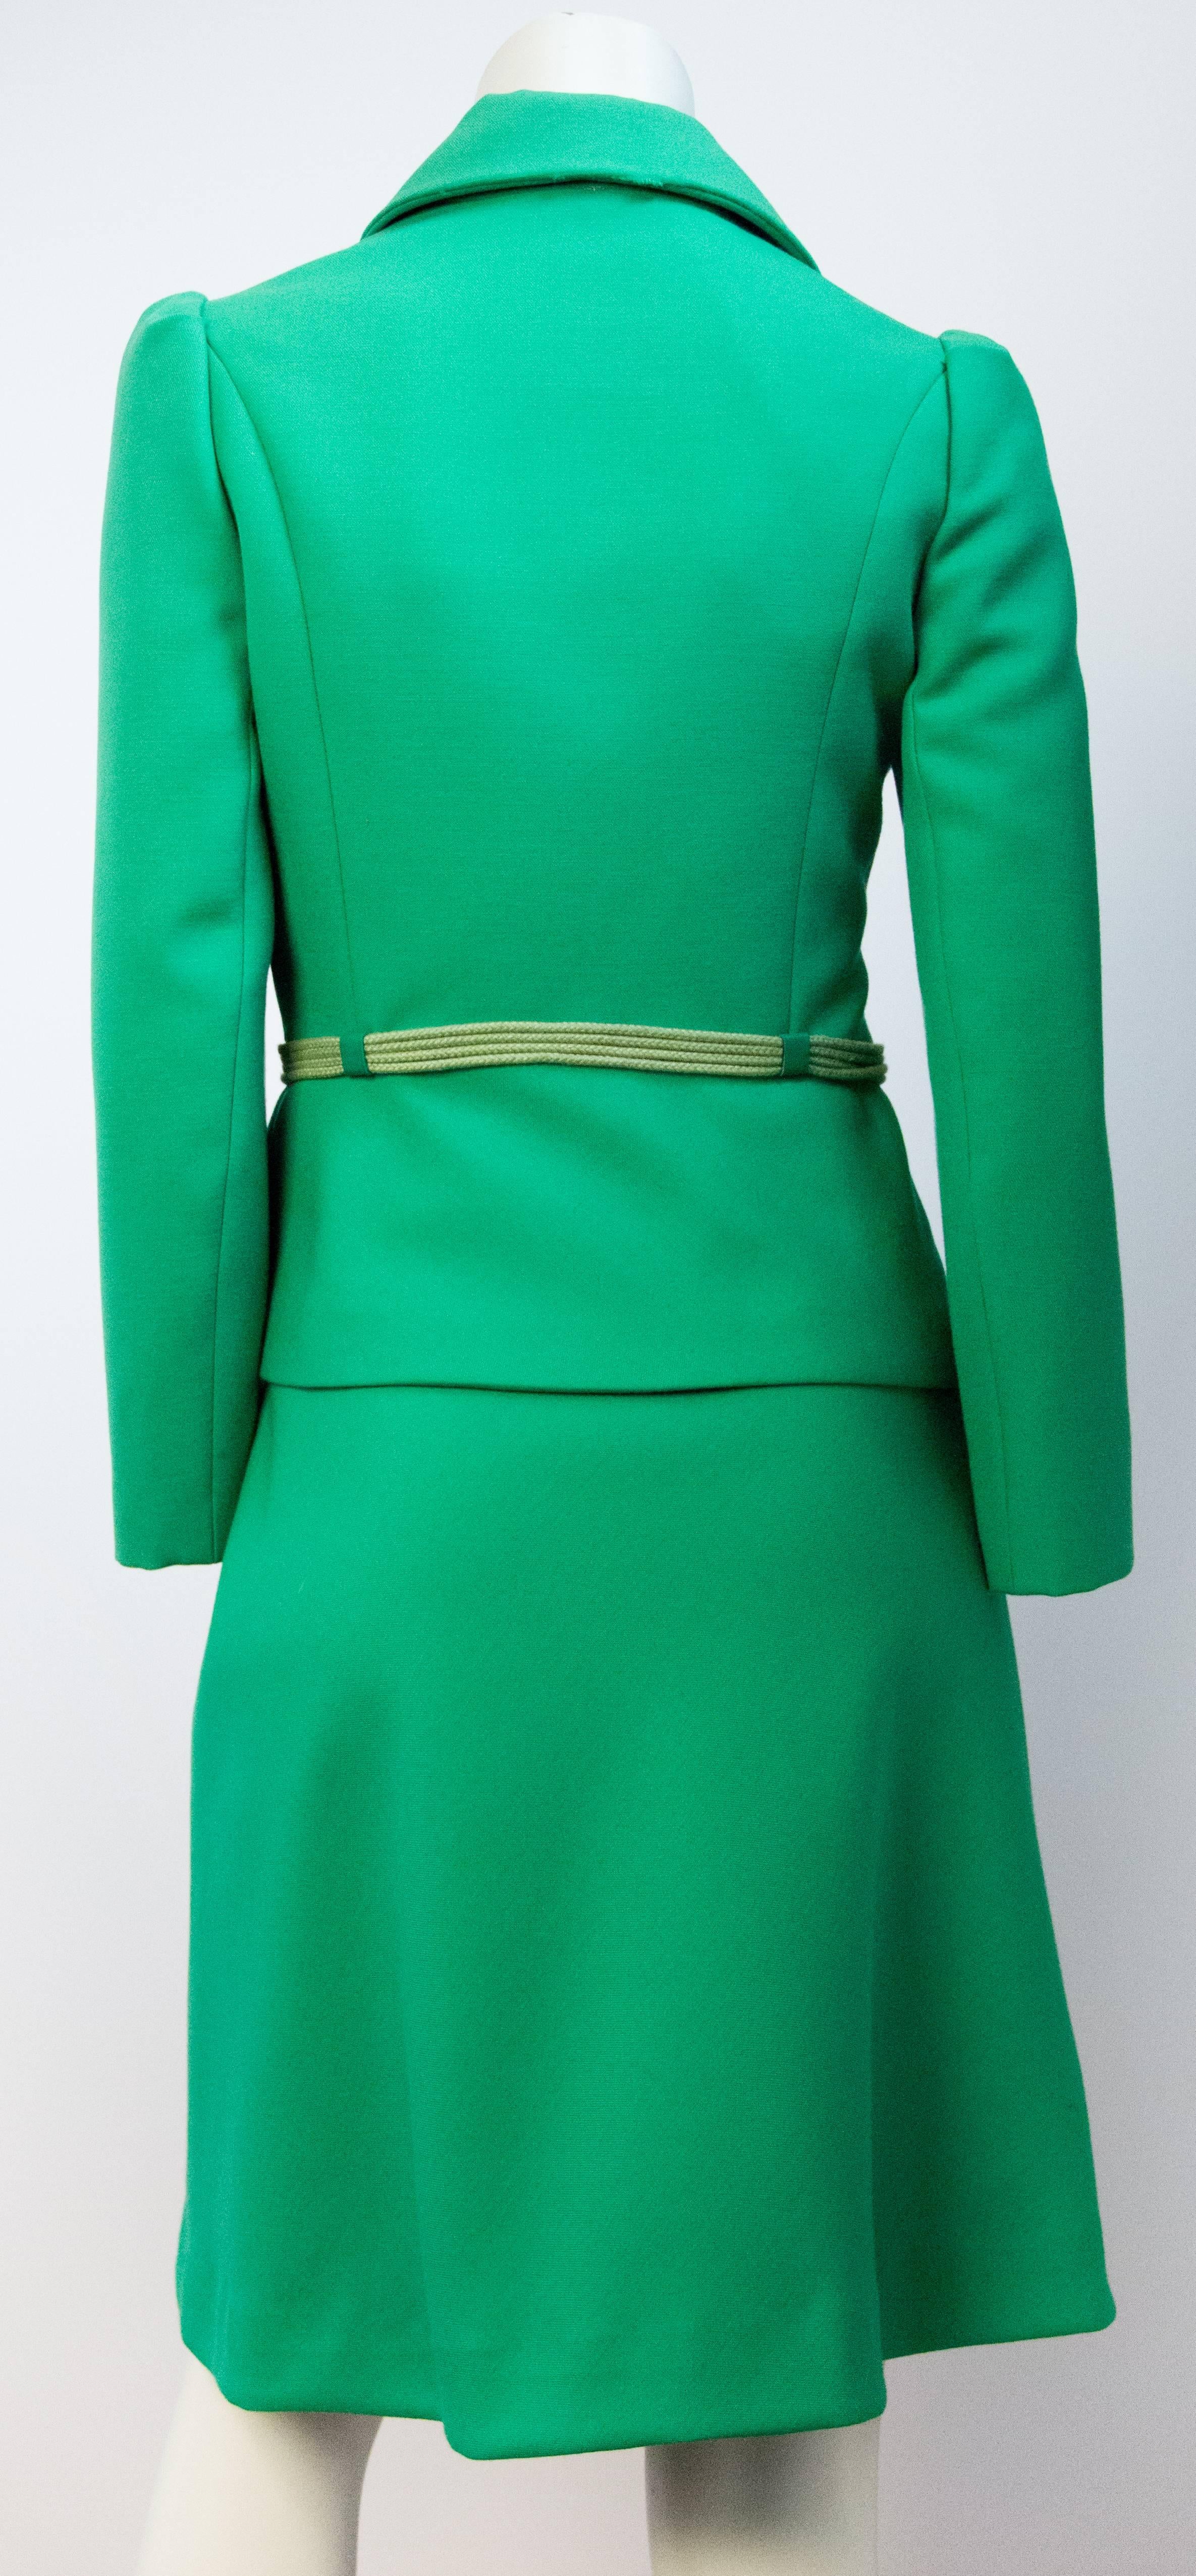 Late 60s fitted green skirt suit. Princess seam fitted jacket. Gold tone buttons on jacket. Green cord and leather belt. Jacket and skirt fully lined in green acetate. Side nylon zipper, and hook and eye closure on skirt. 

Measurements:
Jacket